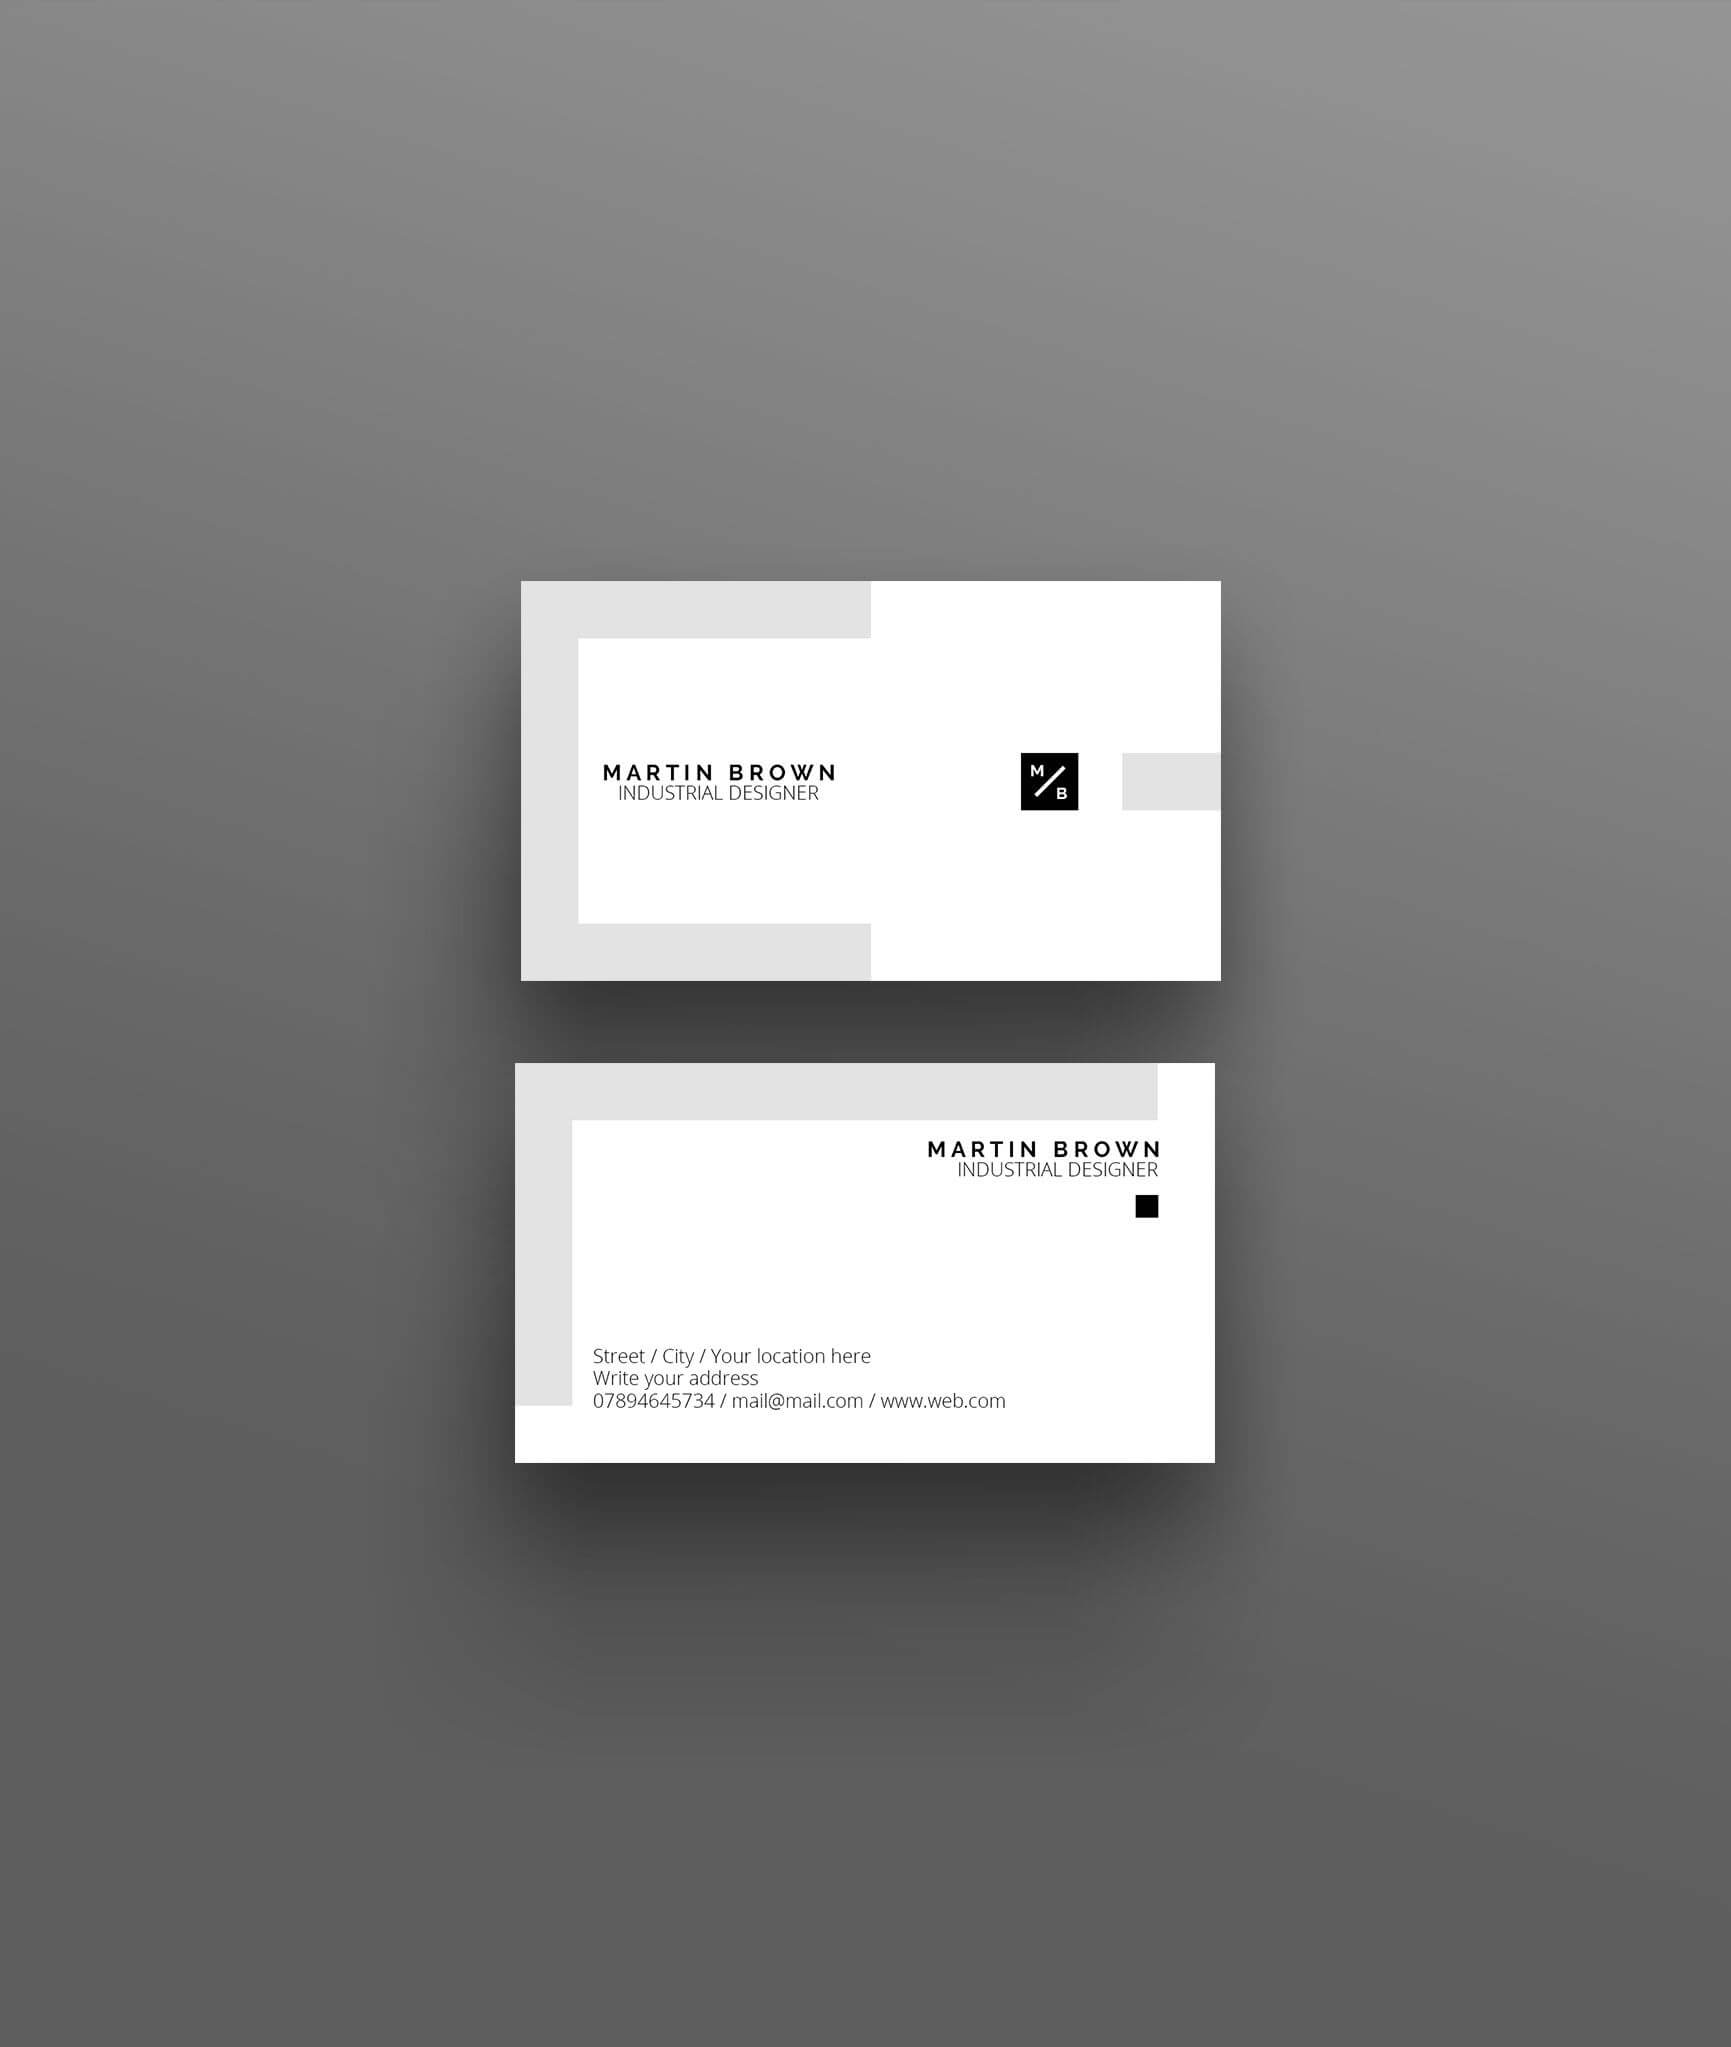 Business Card Template For Adobe Photoshop / Psd File Inside Photoshop Name Card Template